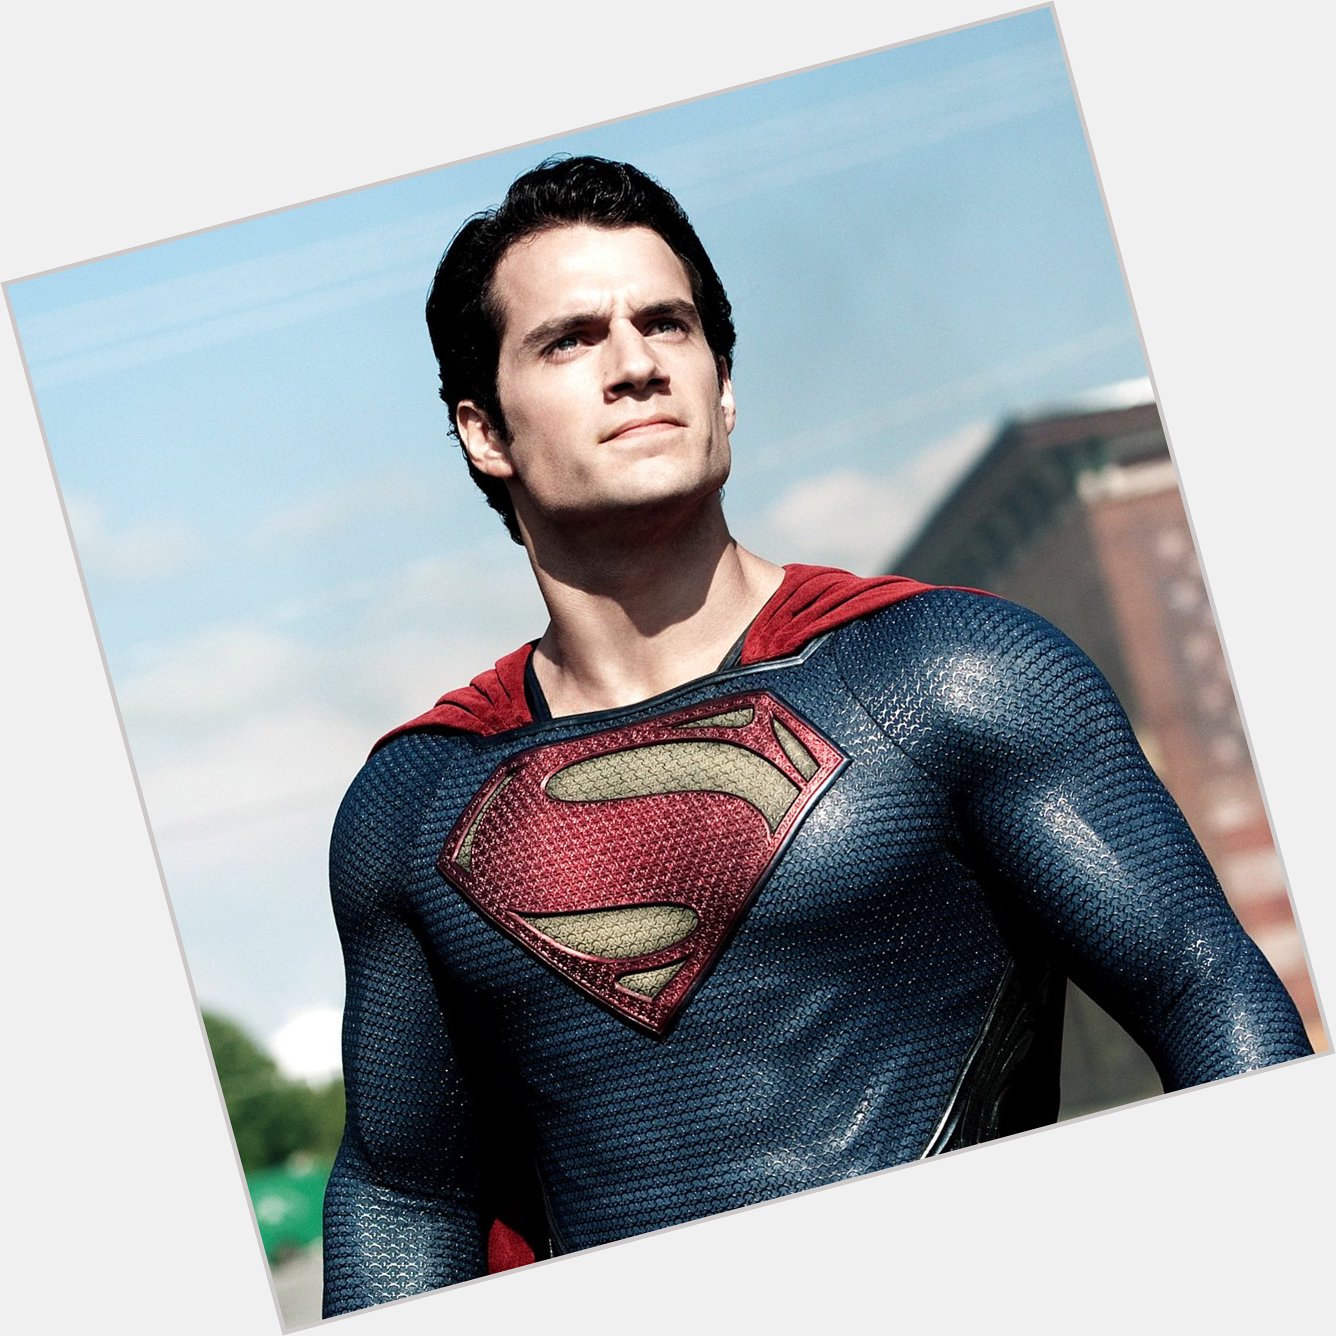 Happy birthday to The Witcher, The Man from U.N.C.L.E., Superman himself - Henry Cavill! 